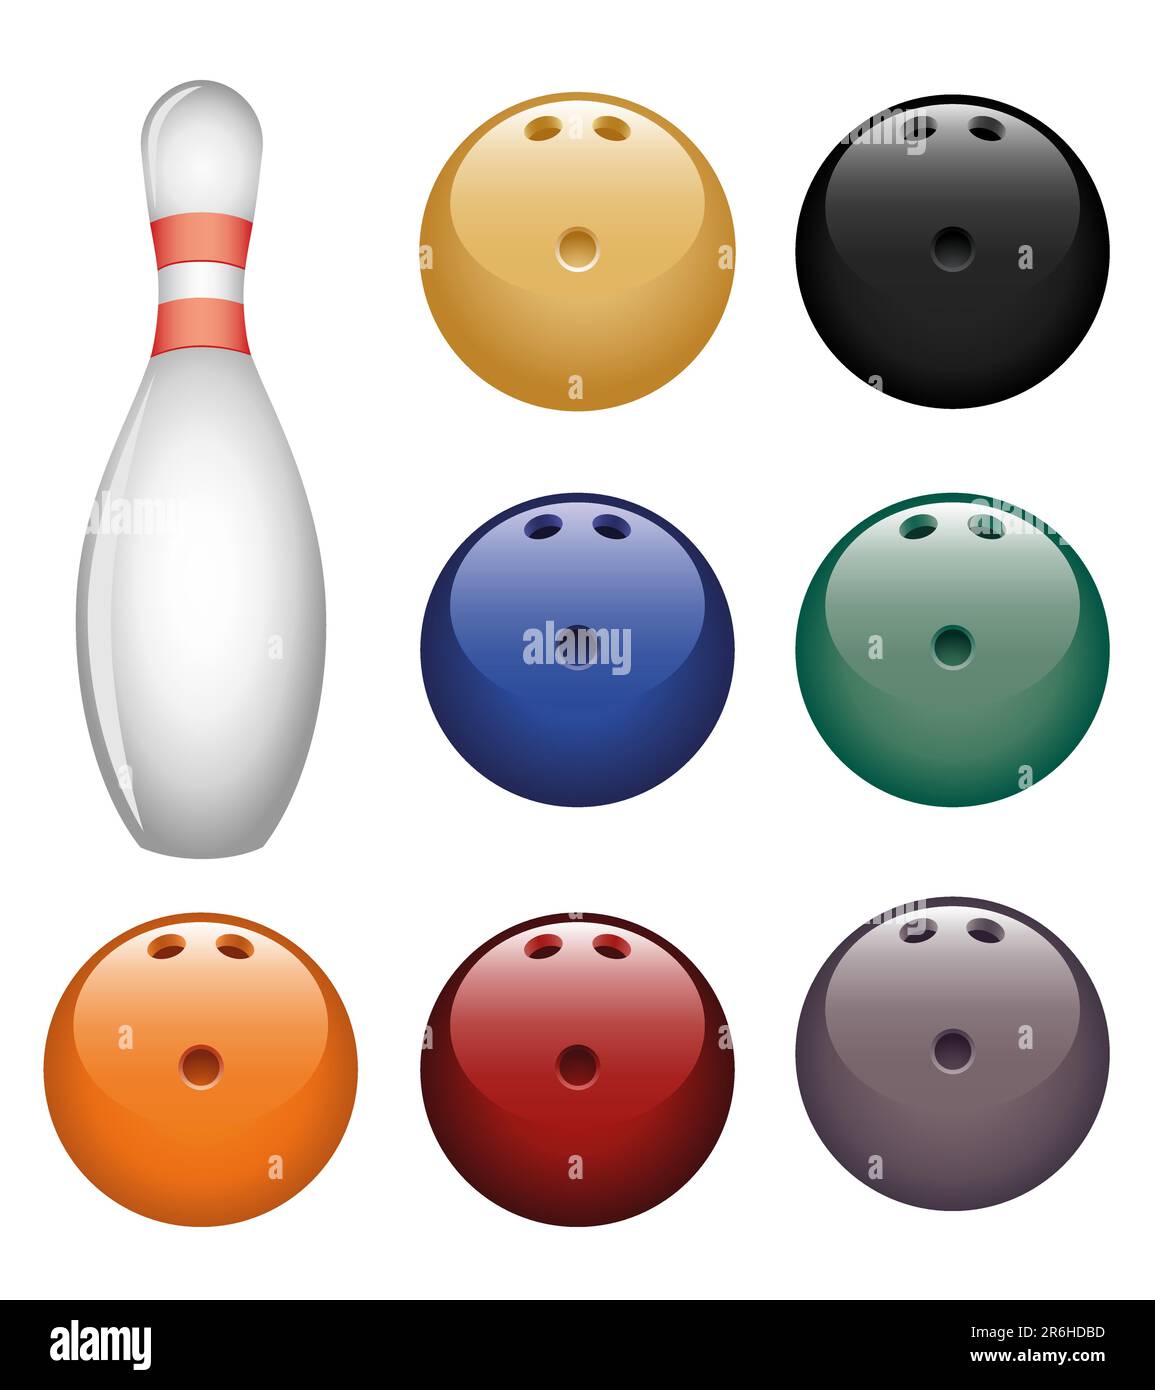 Isolated image of a bowling pin and a balls. Stock Vector